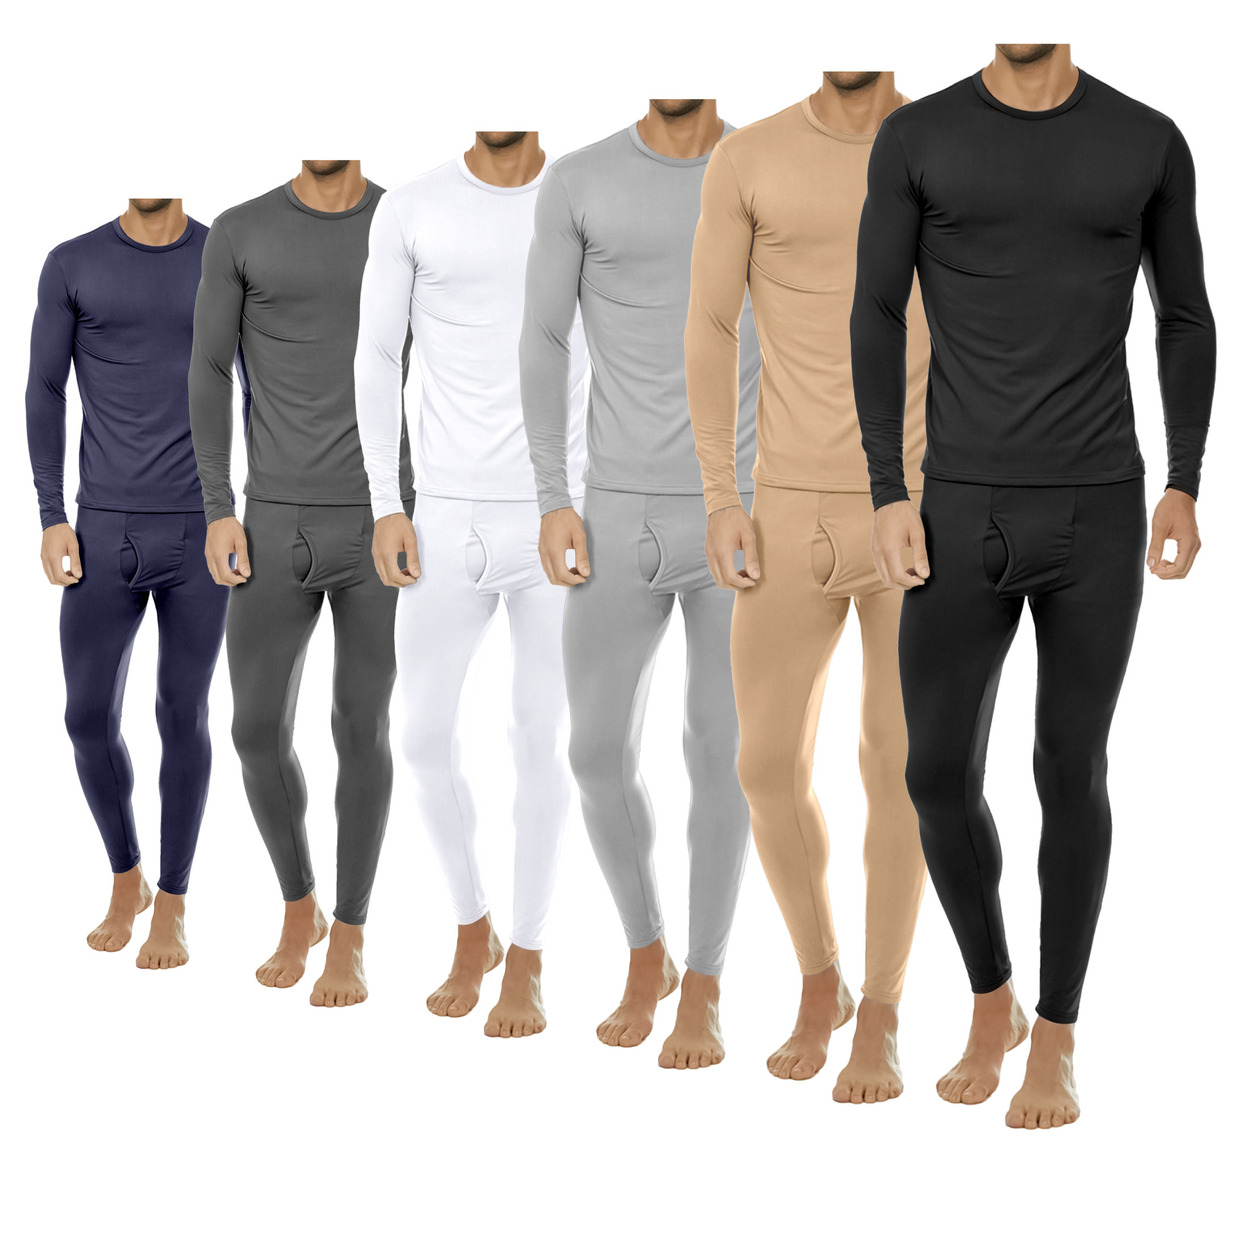 3-Sets: Men's Winter Warm Fleece Lined Thermal Underwear Set For Cold Weather - Large